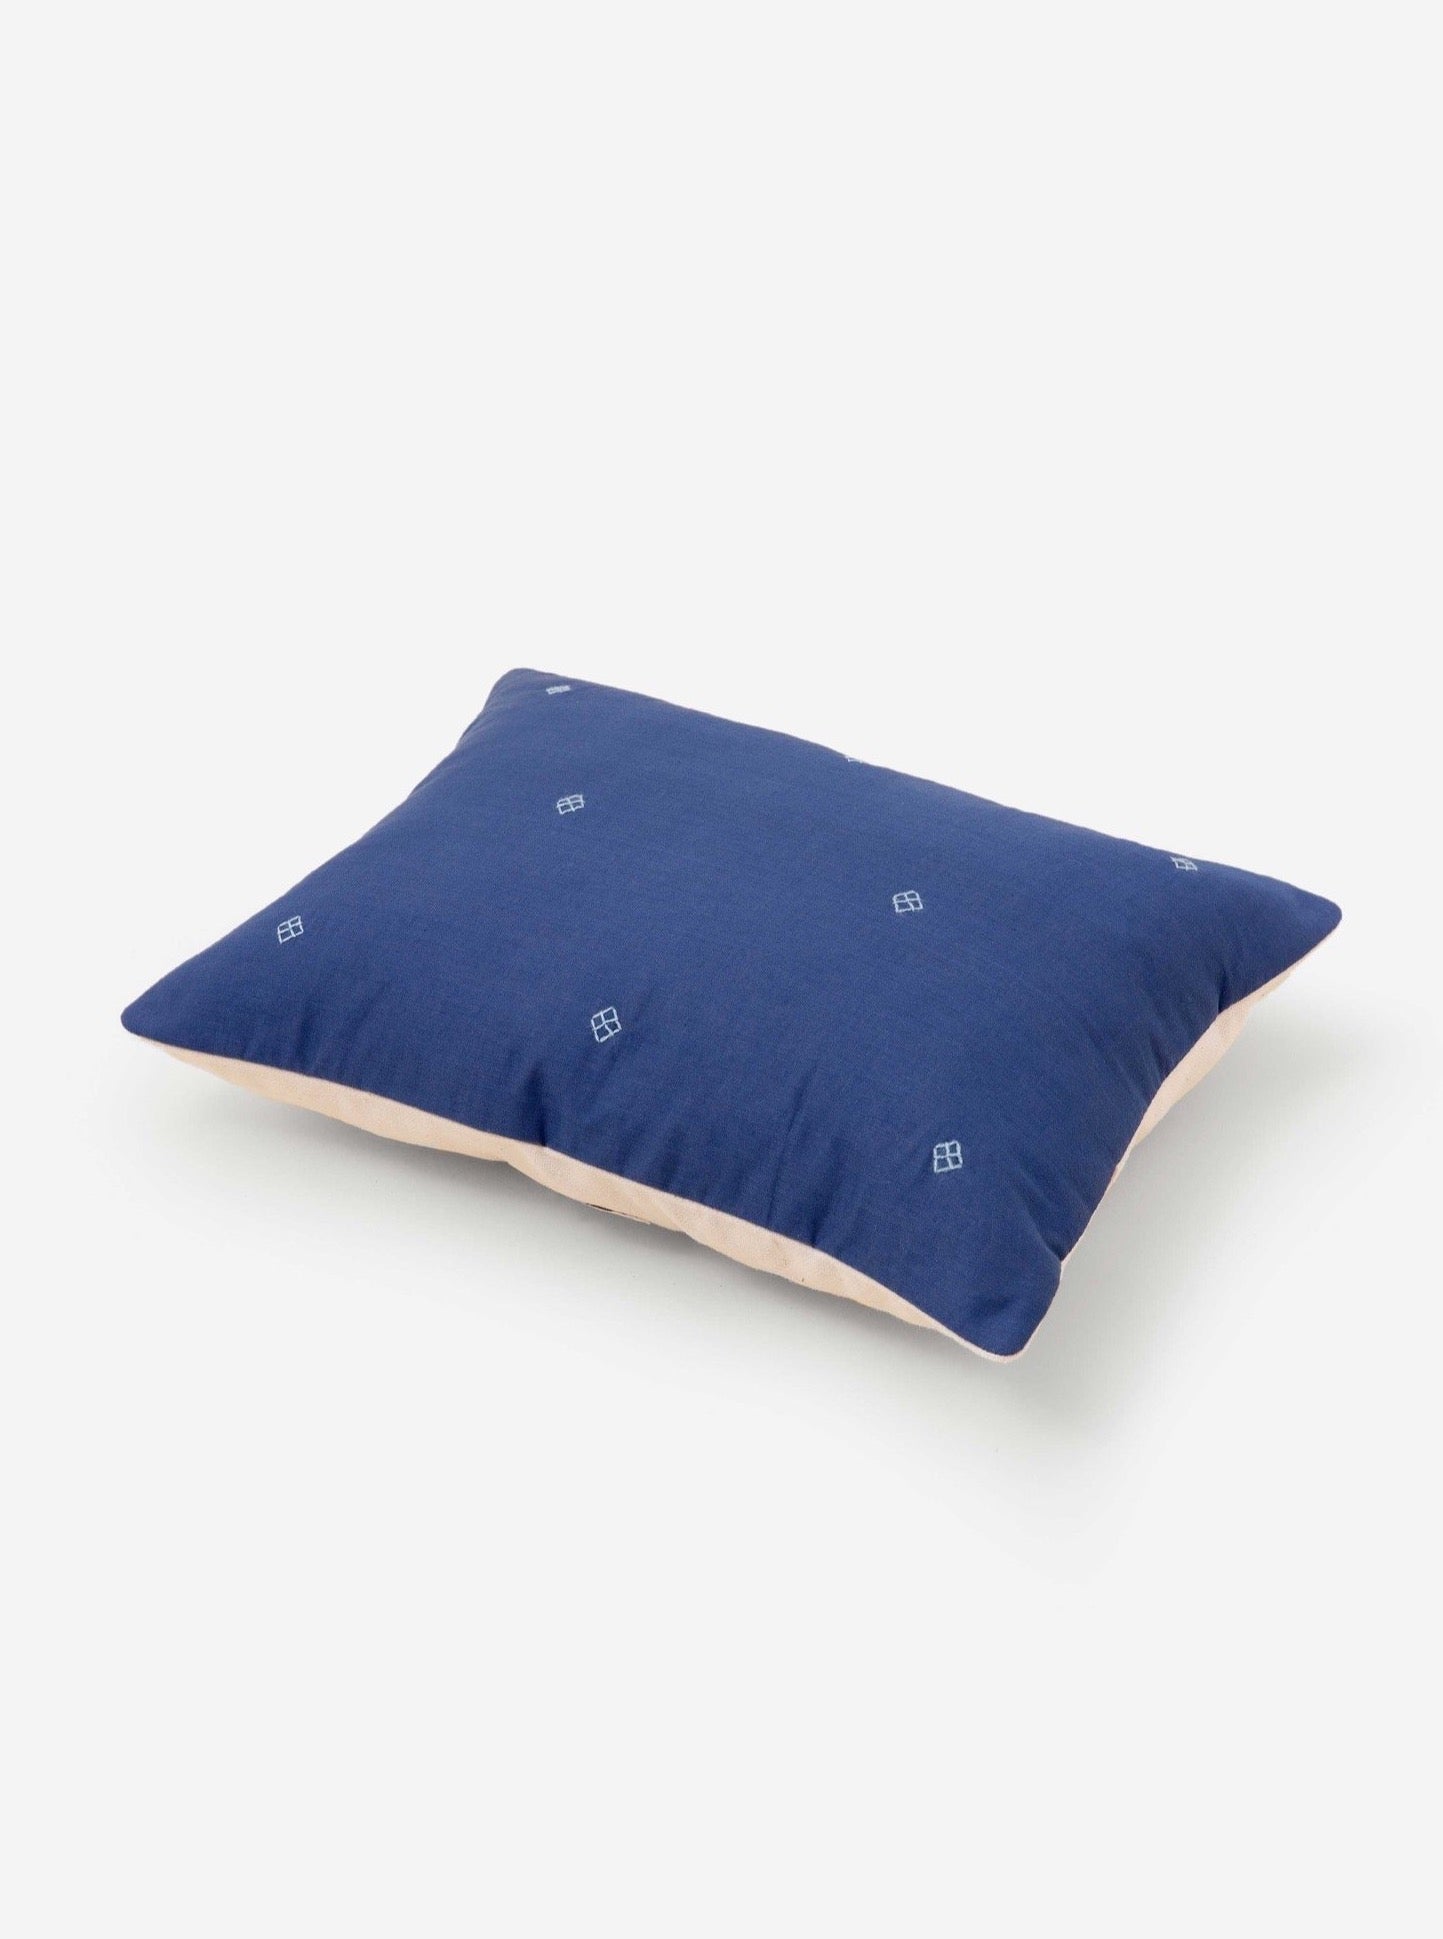 Blue Bandook pillowcase with light blue embroidery 